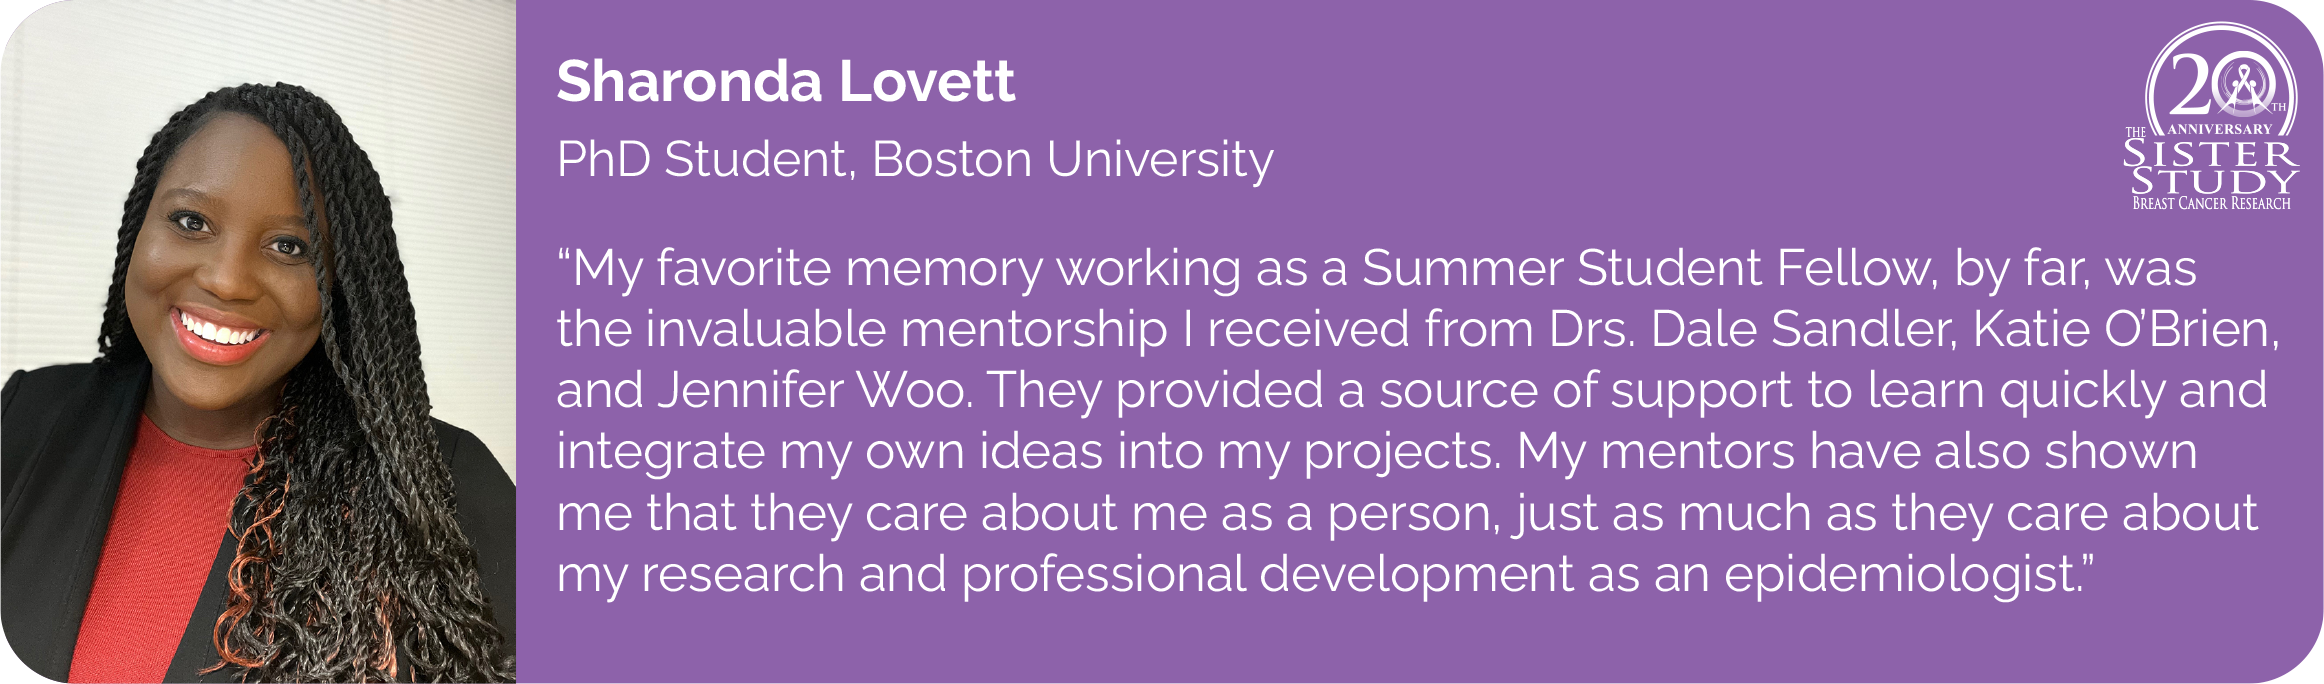 	Sharonda Lovett
PhD Student, Boston University
- My favorite memory working as a Summer Student Fellow, by far, was the invaluable mentorship I received from Drs. Dale Sandler, Katie OBrien, and Jennifer Woo. They provided a source of support to learn quickly and integrate my own ideas into my projects. My mentors have also shown me that they care about me as a person, just as much as they care about my research and professional development as an epidemiologist.